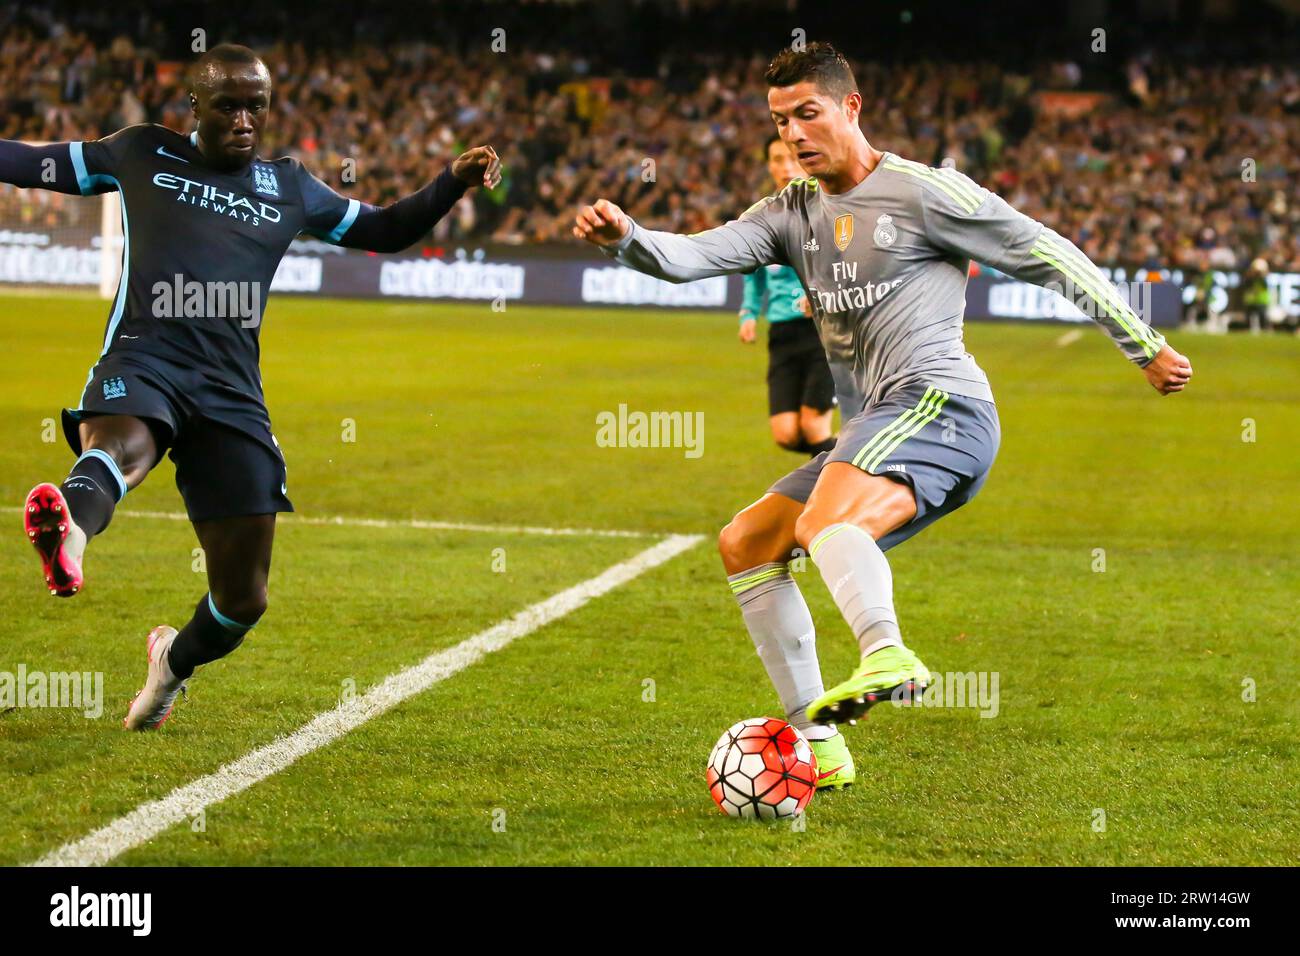 MELBOURNE, AUSTRALIA, JULY 24: Bacary Sagna and Cristiano Ronaldo tussle for the ball as Manchester City play Real Madrid in match 3 of the 2015 Stock Photo